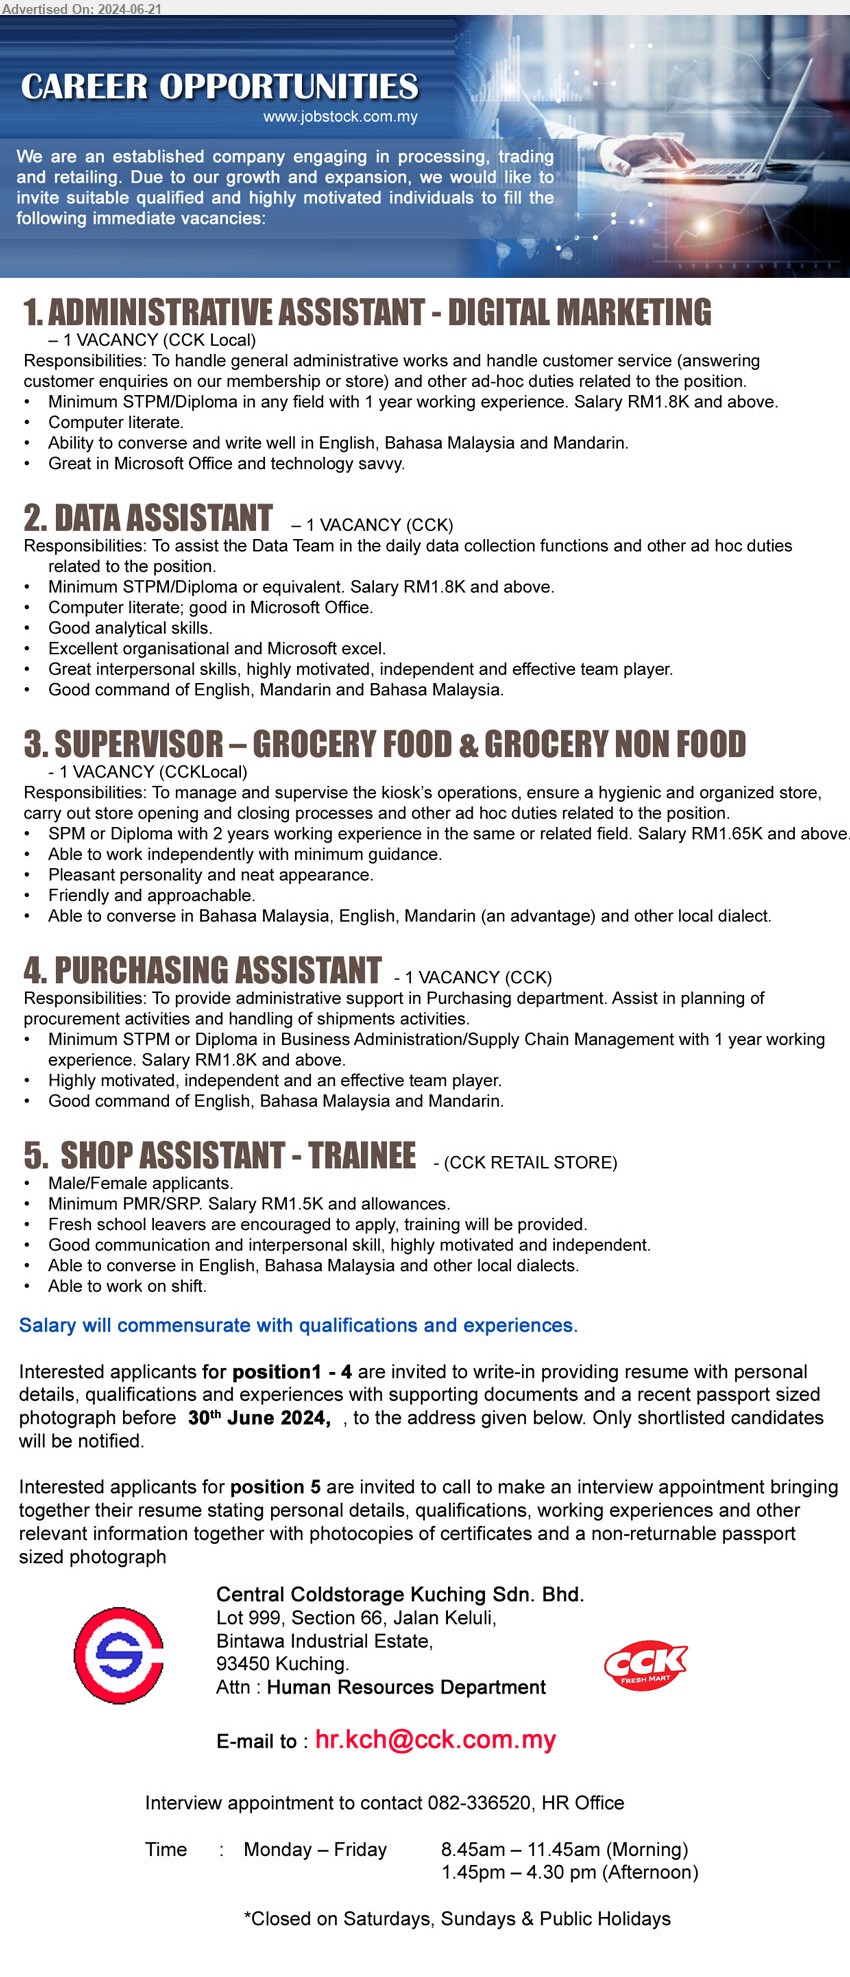 CENTRAL COLDSTORAGE KUCHING SDN BHD - 1. ADMINISTRATIVE ASSISTANT - DIGITAL MARKETING (Kuching), STPM/Diploma in any field with 1 year working experience. Salary RM1.8K and above.,...
2. DATA ASSISTANT (Kuching), STPM/Diploma or equivalent. Salary RM1.8K and above.,...
3. SUPERVISOR – GROCERY FOOD & GROCERY NON FOOD (Kuching), SPM or Diploma with 2 years working experience in the same or related field. Salary RM1.65K and above,...
4. PURCHASING ASSISTANT (Kuching), STPM or Diploma in Business Administration/Supply Chain Management with 1 year working 
experience. Salary RM1.8K and above,...
5. SHOP ASSISTANT - TRAINEE  (Kuching), Minimum PMR/SRP. Salary RM1.5K and allowances,...
For Post 1 - 4, Email resume to ...
For Post 5, Interview appointment to contact 082-336520

